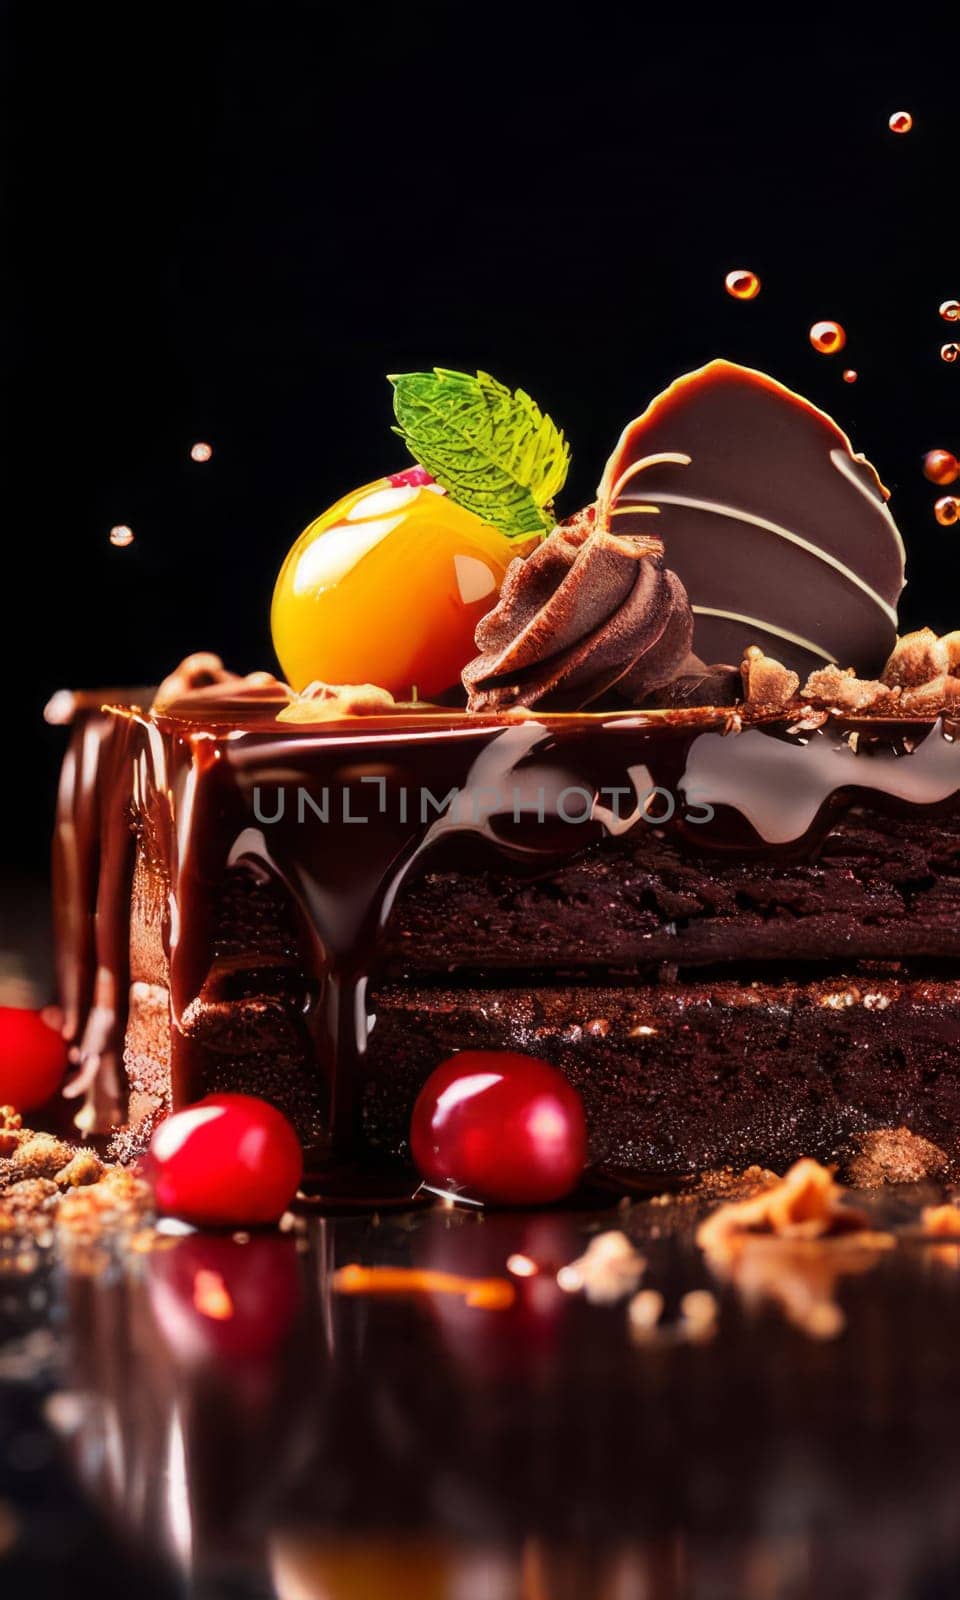 Decadent slice of chocolate cake topped with luscious cherries, drizzled with rich chocolate sauce. For dessert recipes, cafe, restaurant menu, culinary book, recipe website, culinary blog